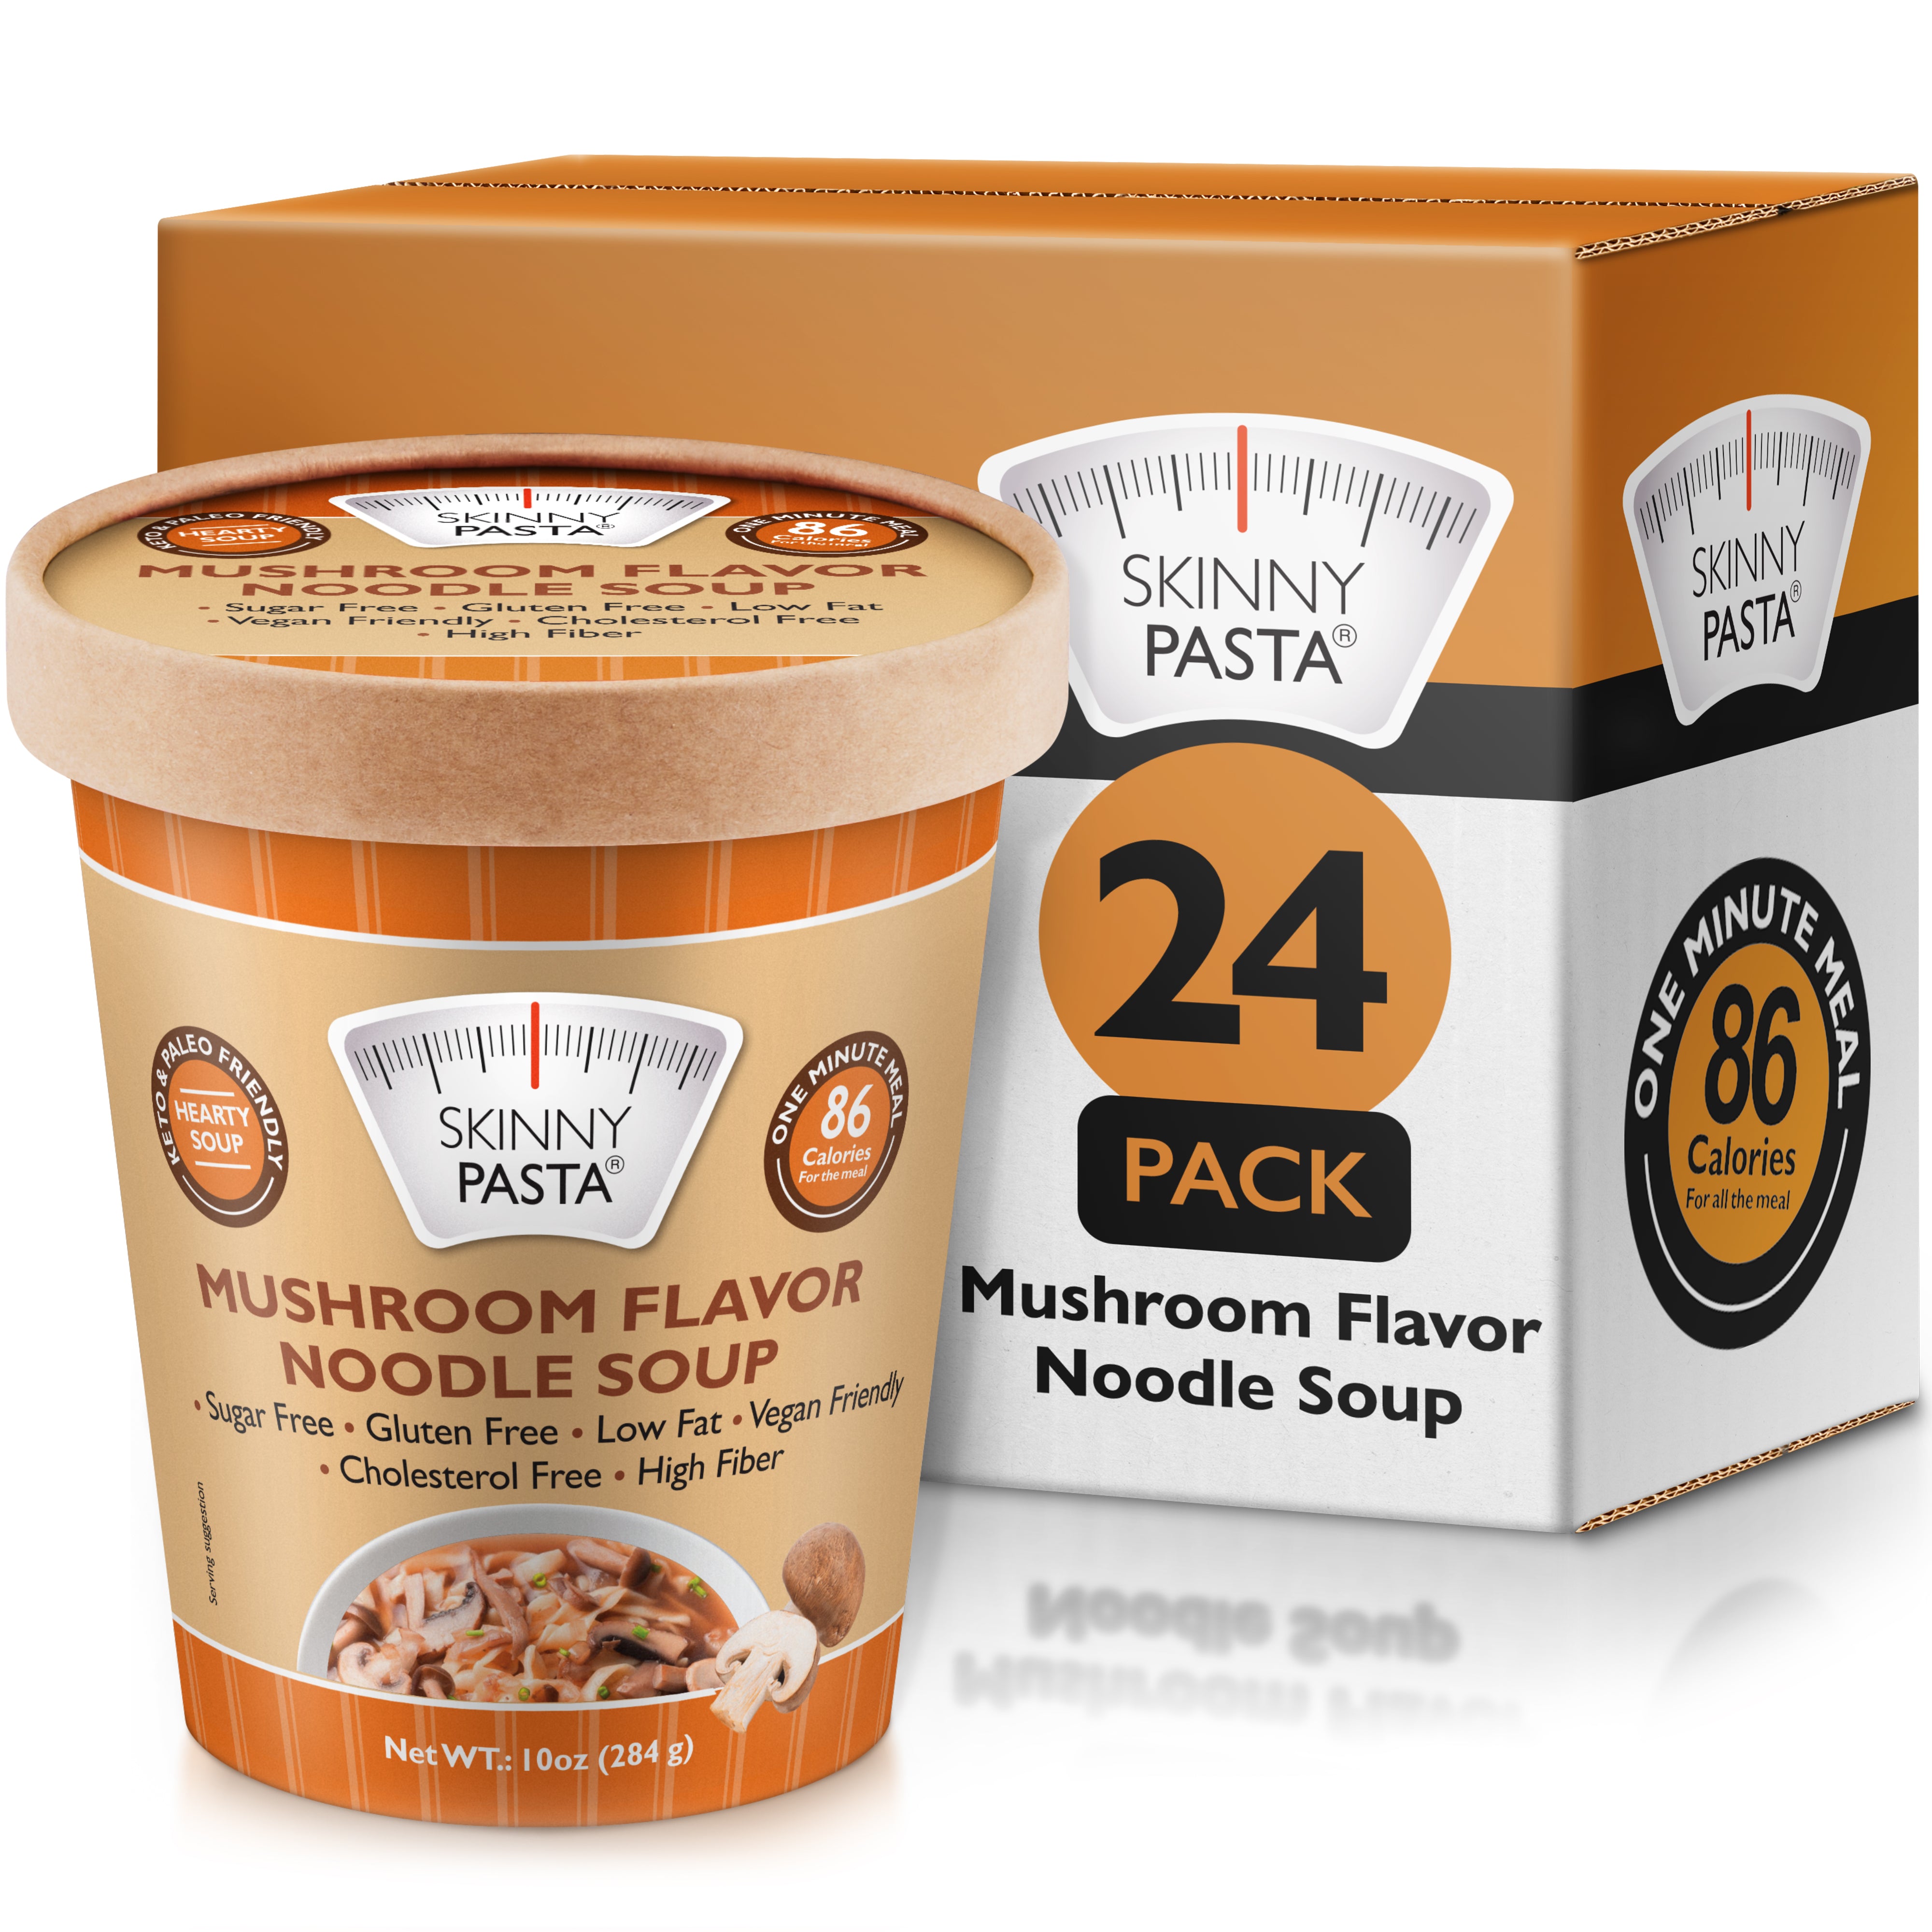 Skinny Soup Mushroom Flavor - 24 Pack: Instant, Low-Calorie, Ready-to-Eat Noodles